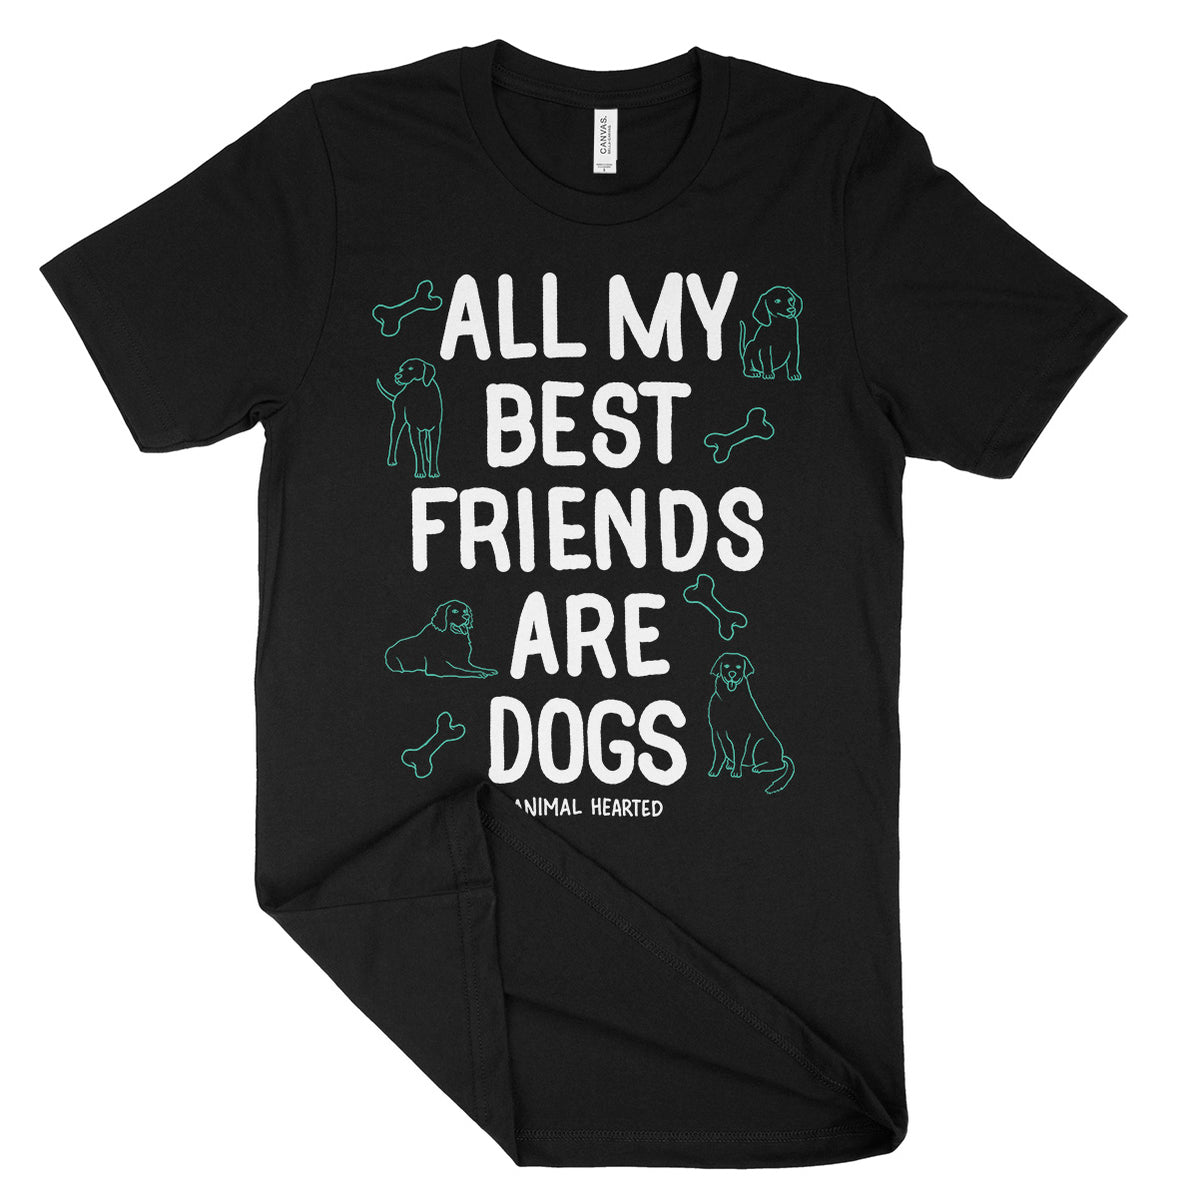 Apparel & Gifts For Animal Lovers - Animal Hearted Apparel